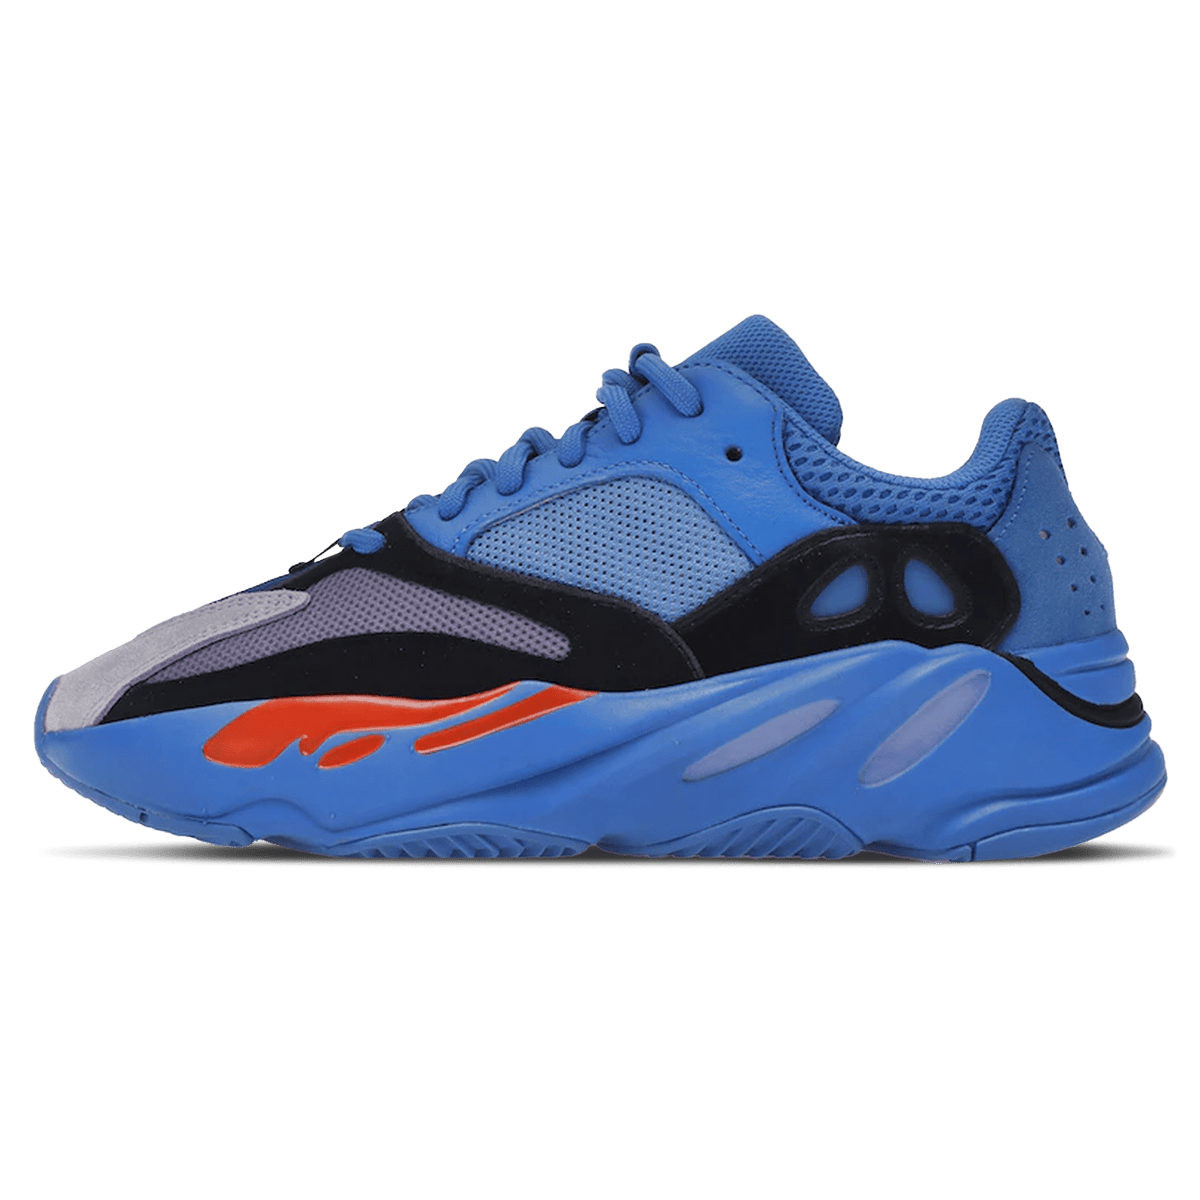 adidas boost yeezy boost 700 hi res blue HP6674 1